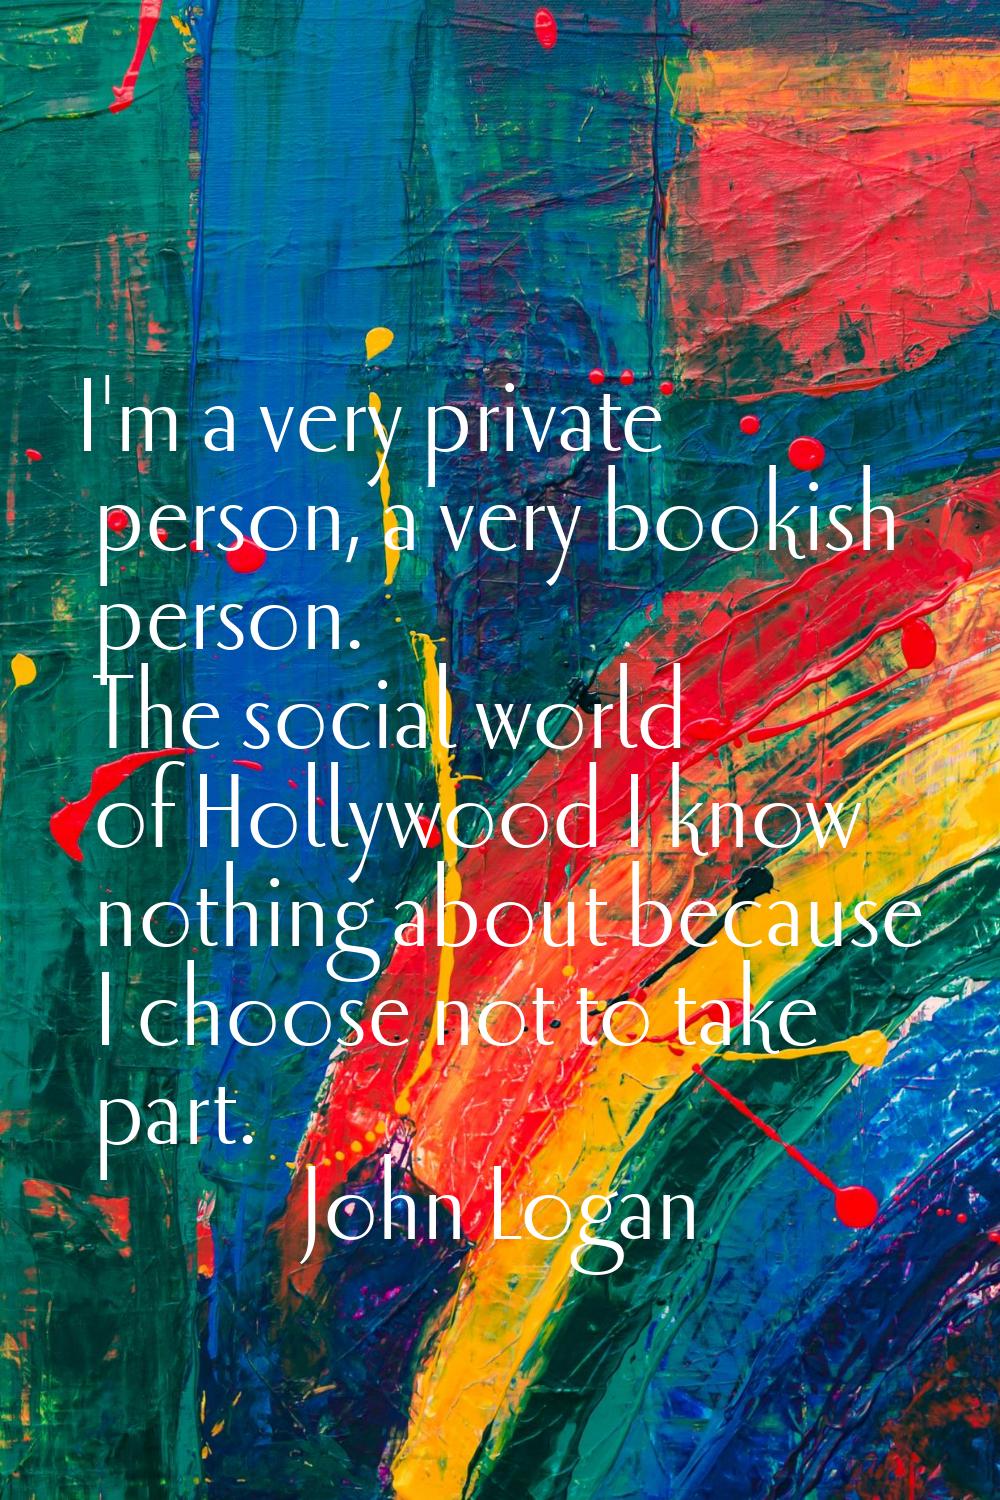 I'm a very private person, a very bookish person. The social world of Hollywood I know nothing abou